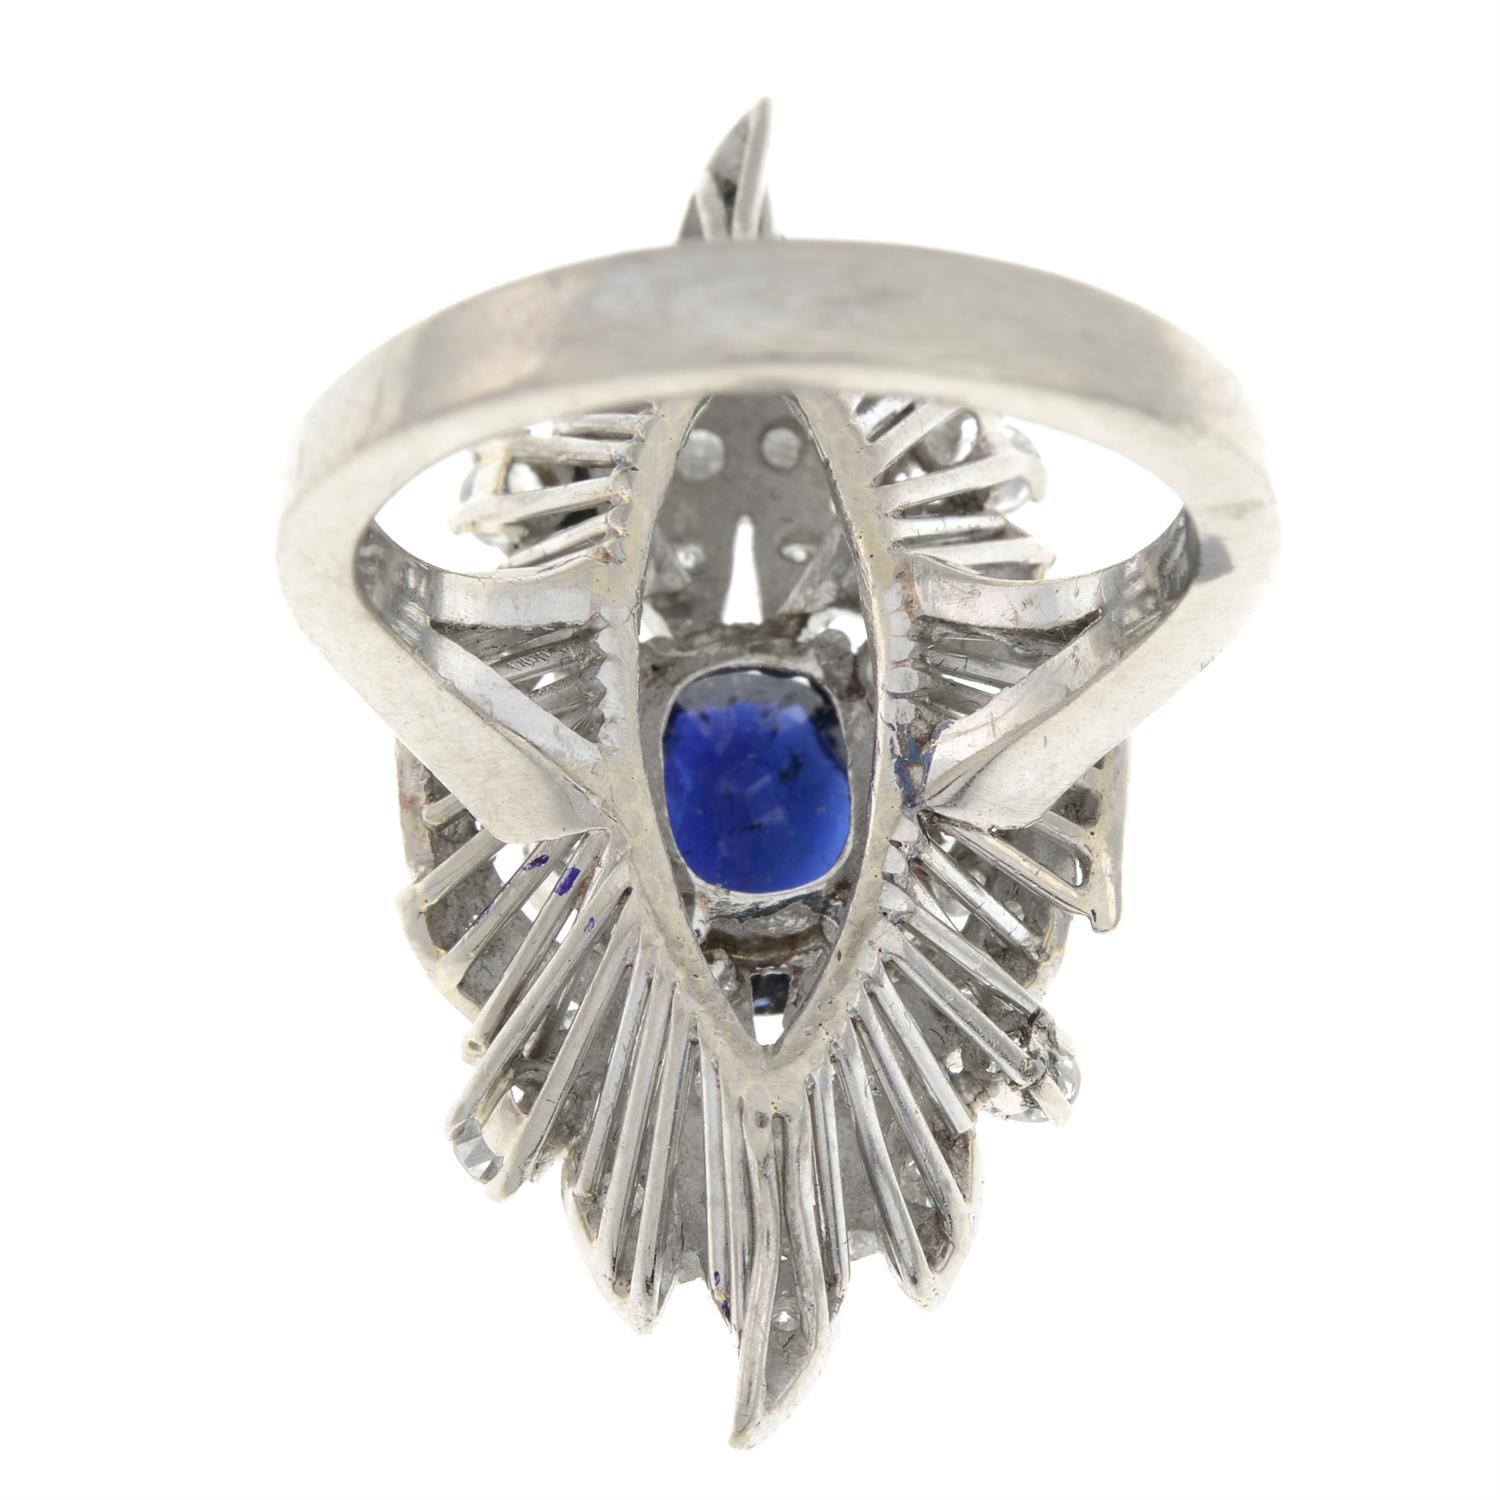 Mid 20th century sapphire and diamond ring - Image 3 of 5